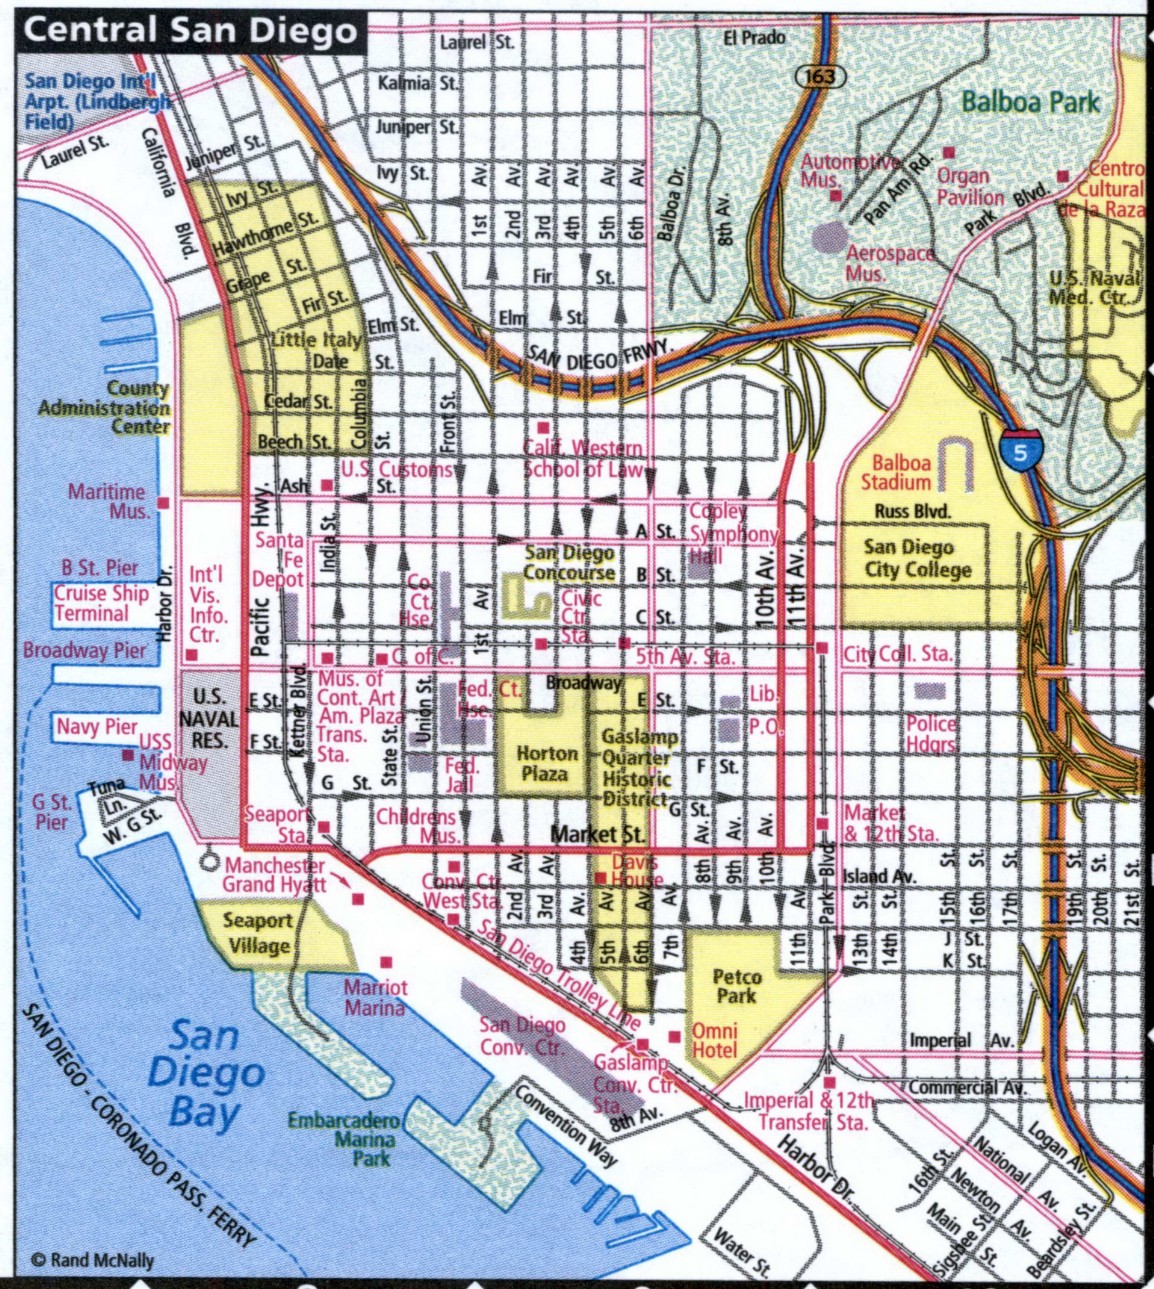 San Diego city road map for truck drivers area town toll free highways ...